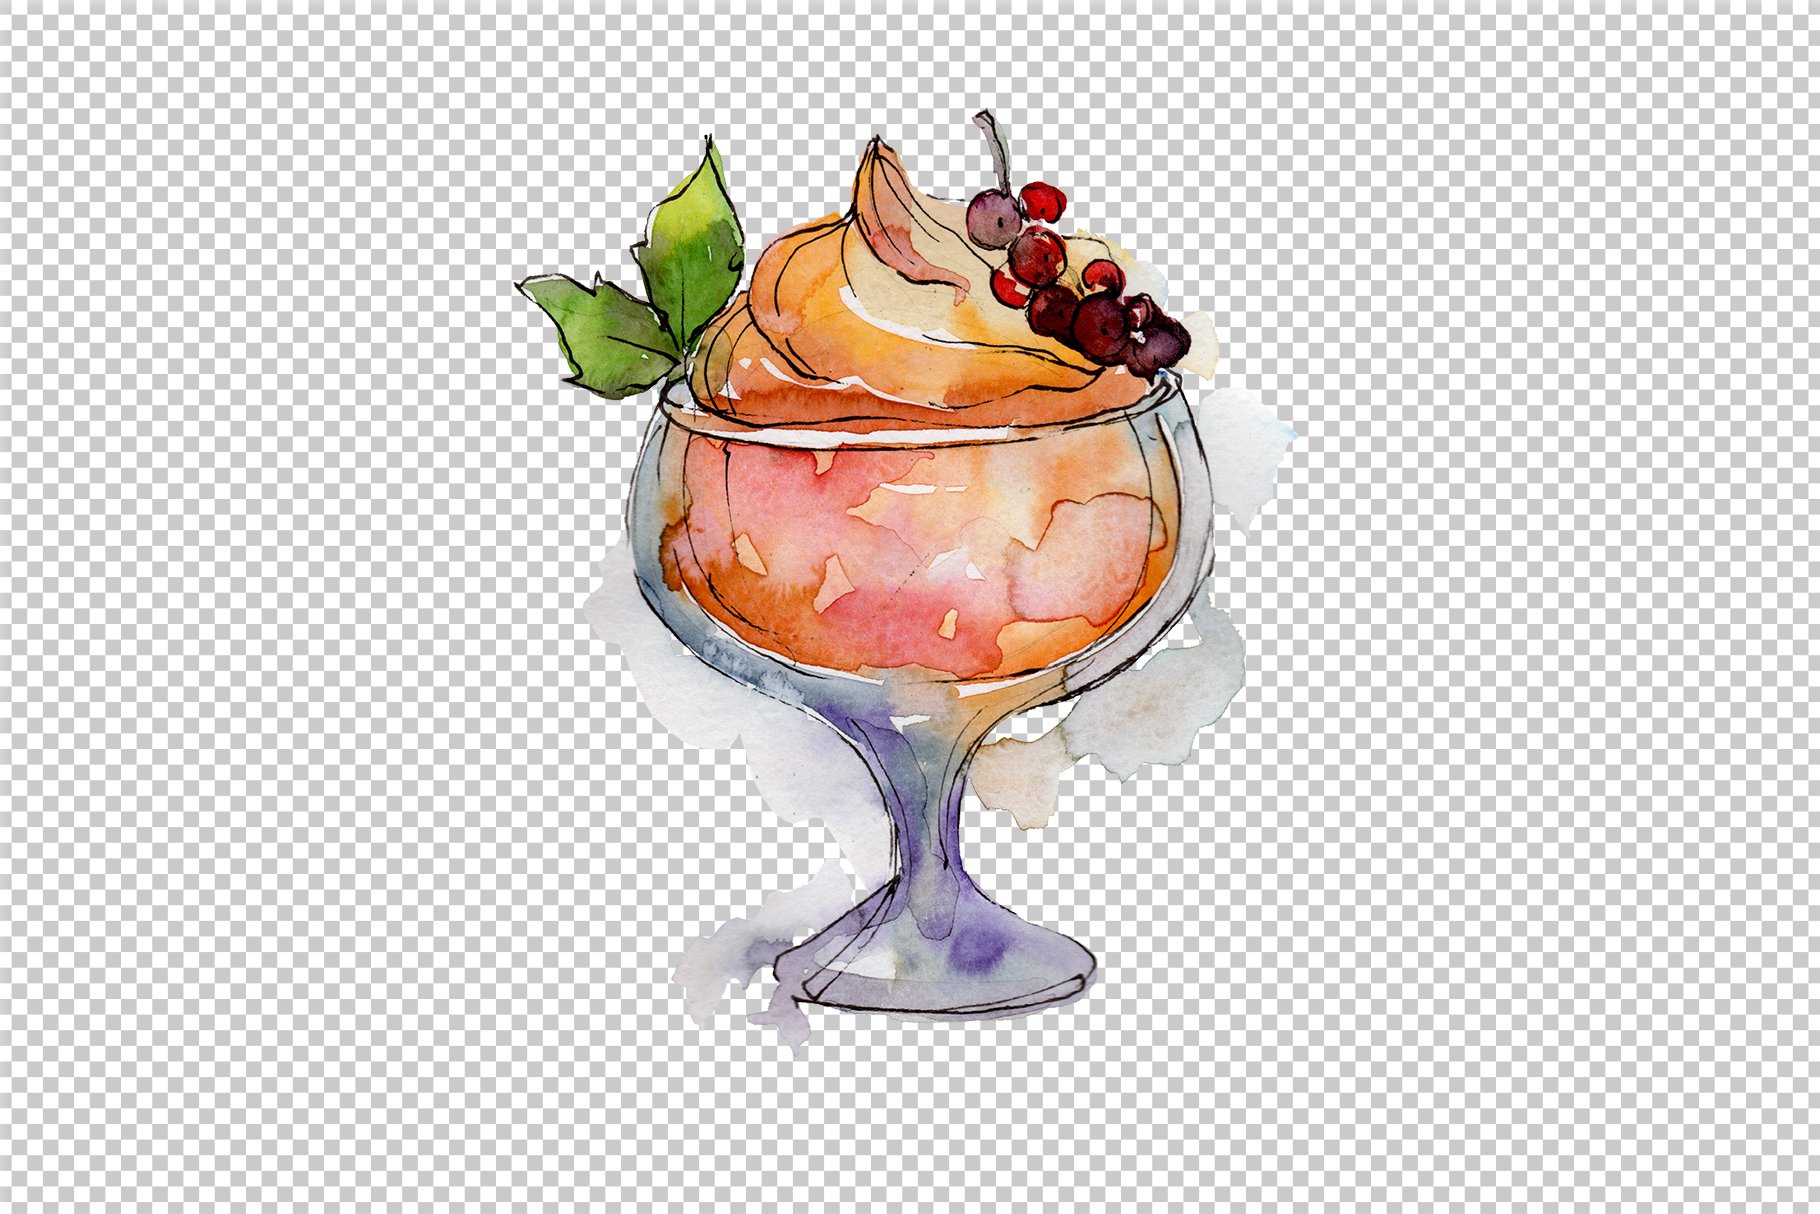 Transparent background with the full cup of the ice cream.